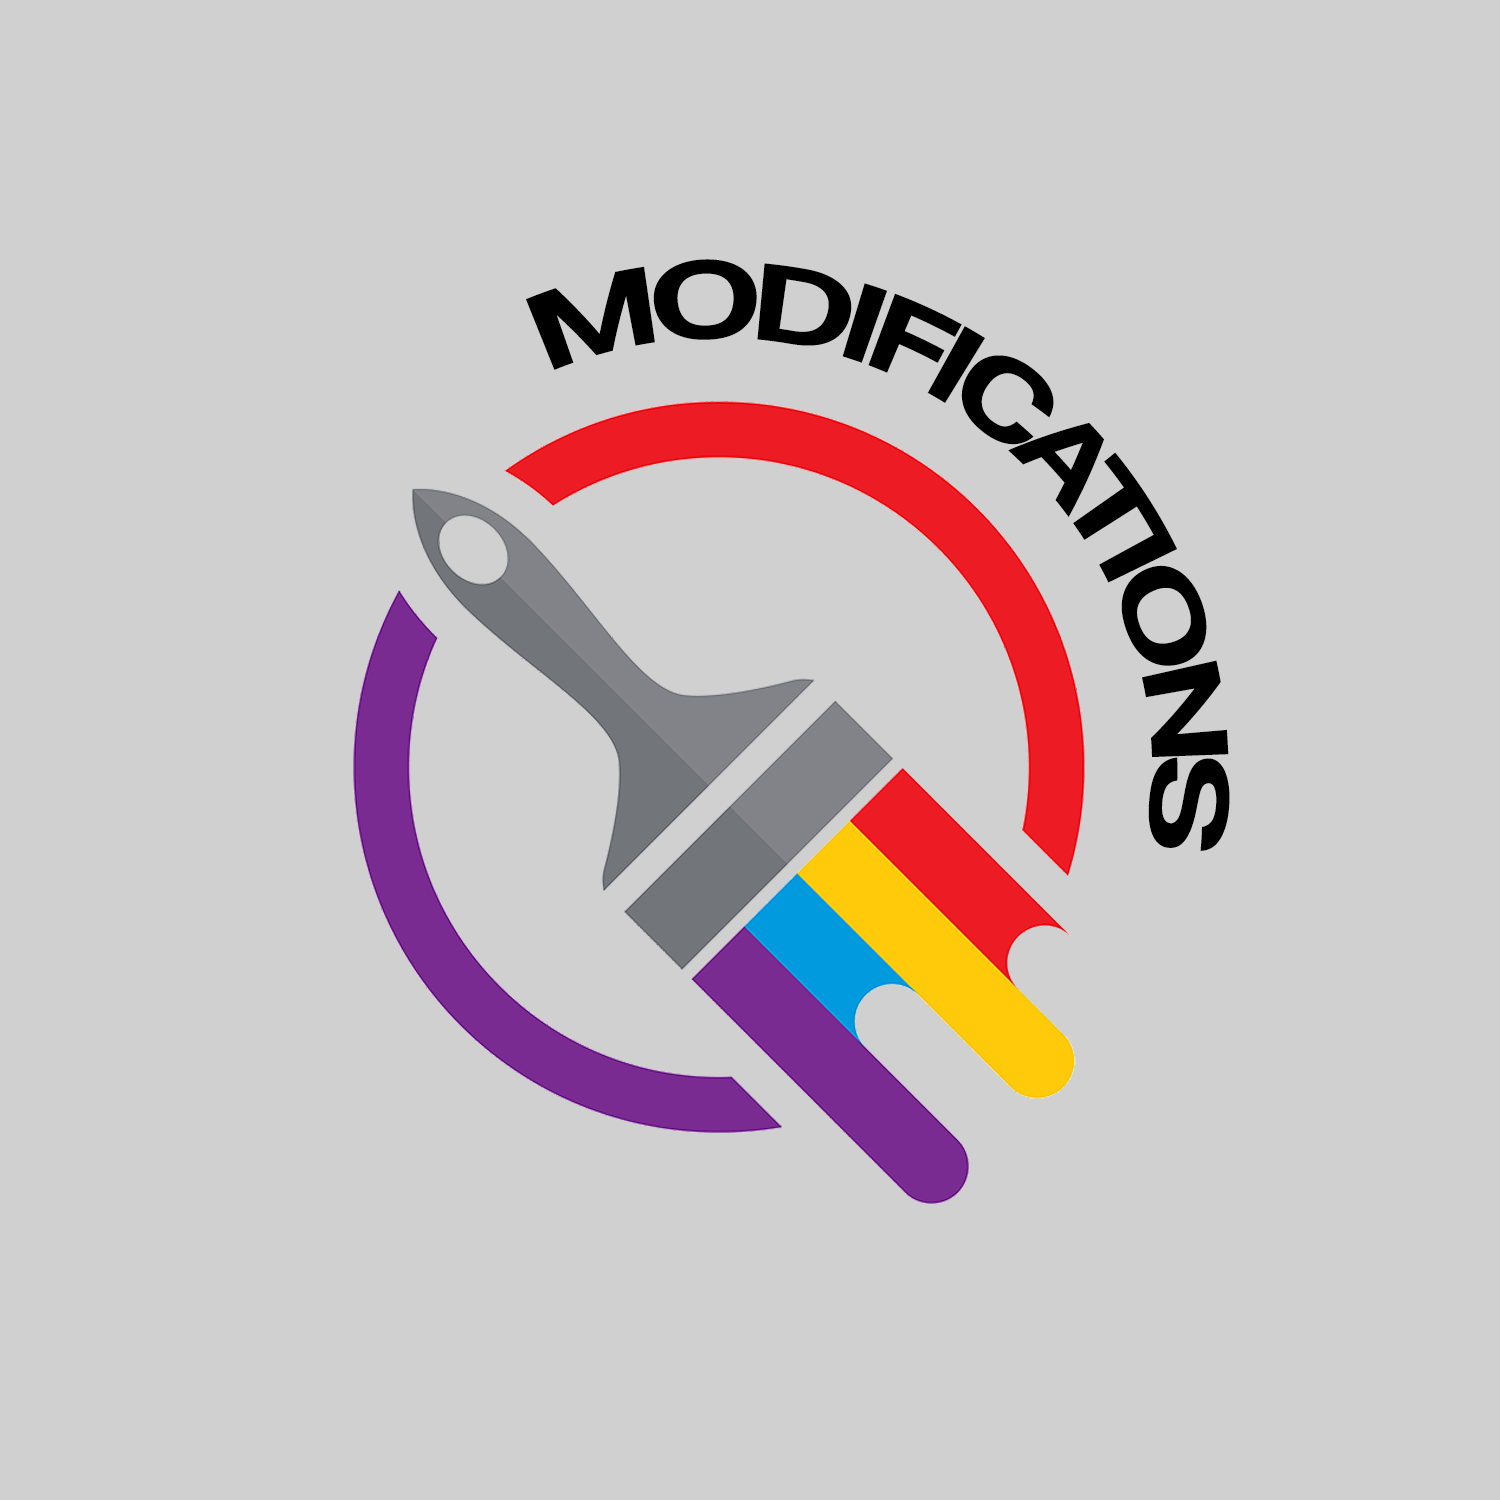 Modifications n°2 - Ollow